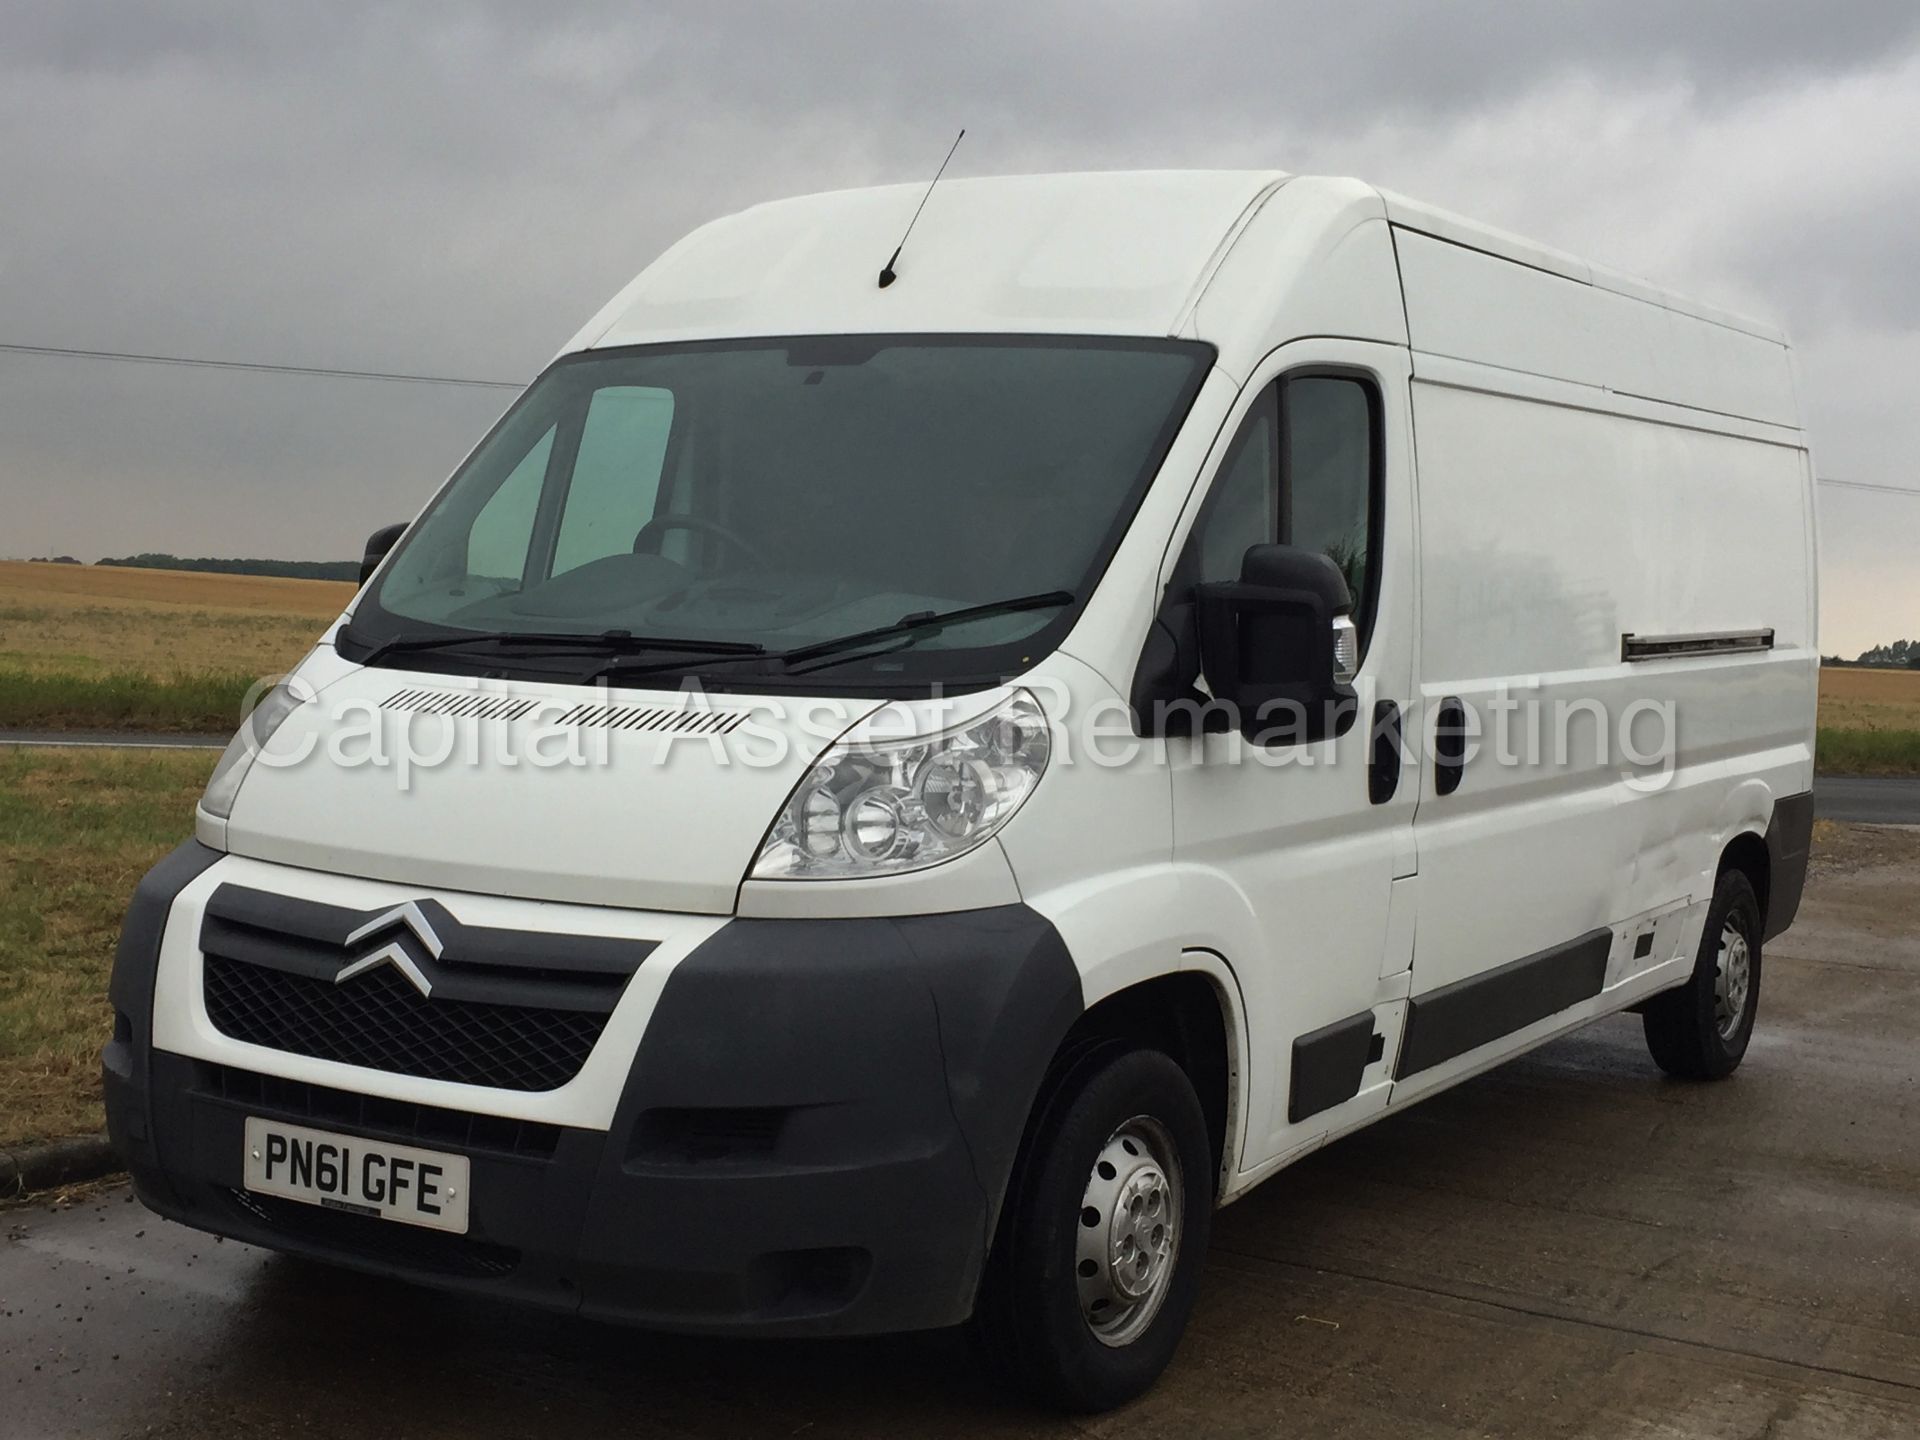 (ON SALE) CITROEN RELAY 35 'LWB HI-ROOF' (2012 MODEL) '2.2 HDI - 120 BHP - 6 SPEED' (1 FORMER OWNER) - Image 5 of 19